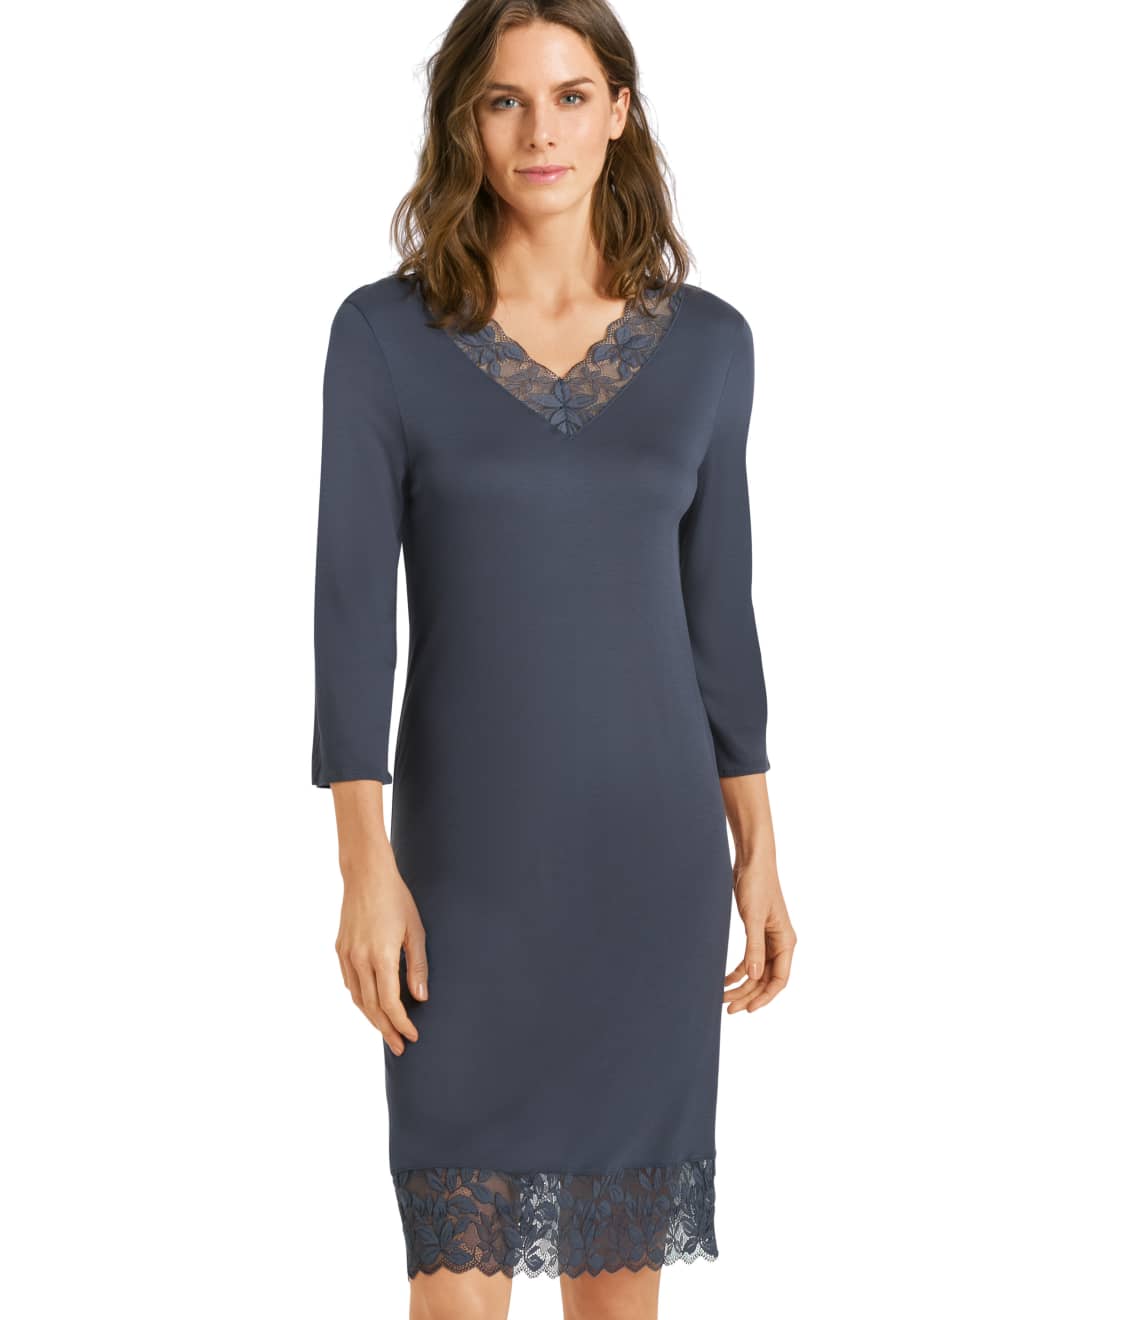 Hanro: Lille Modal Knit Nightgown 76823